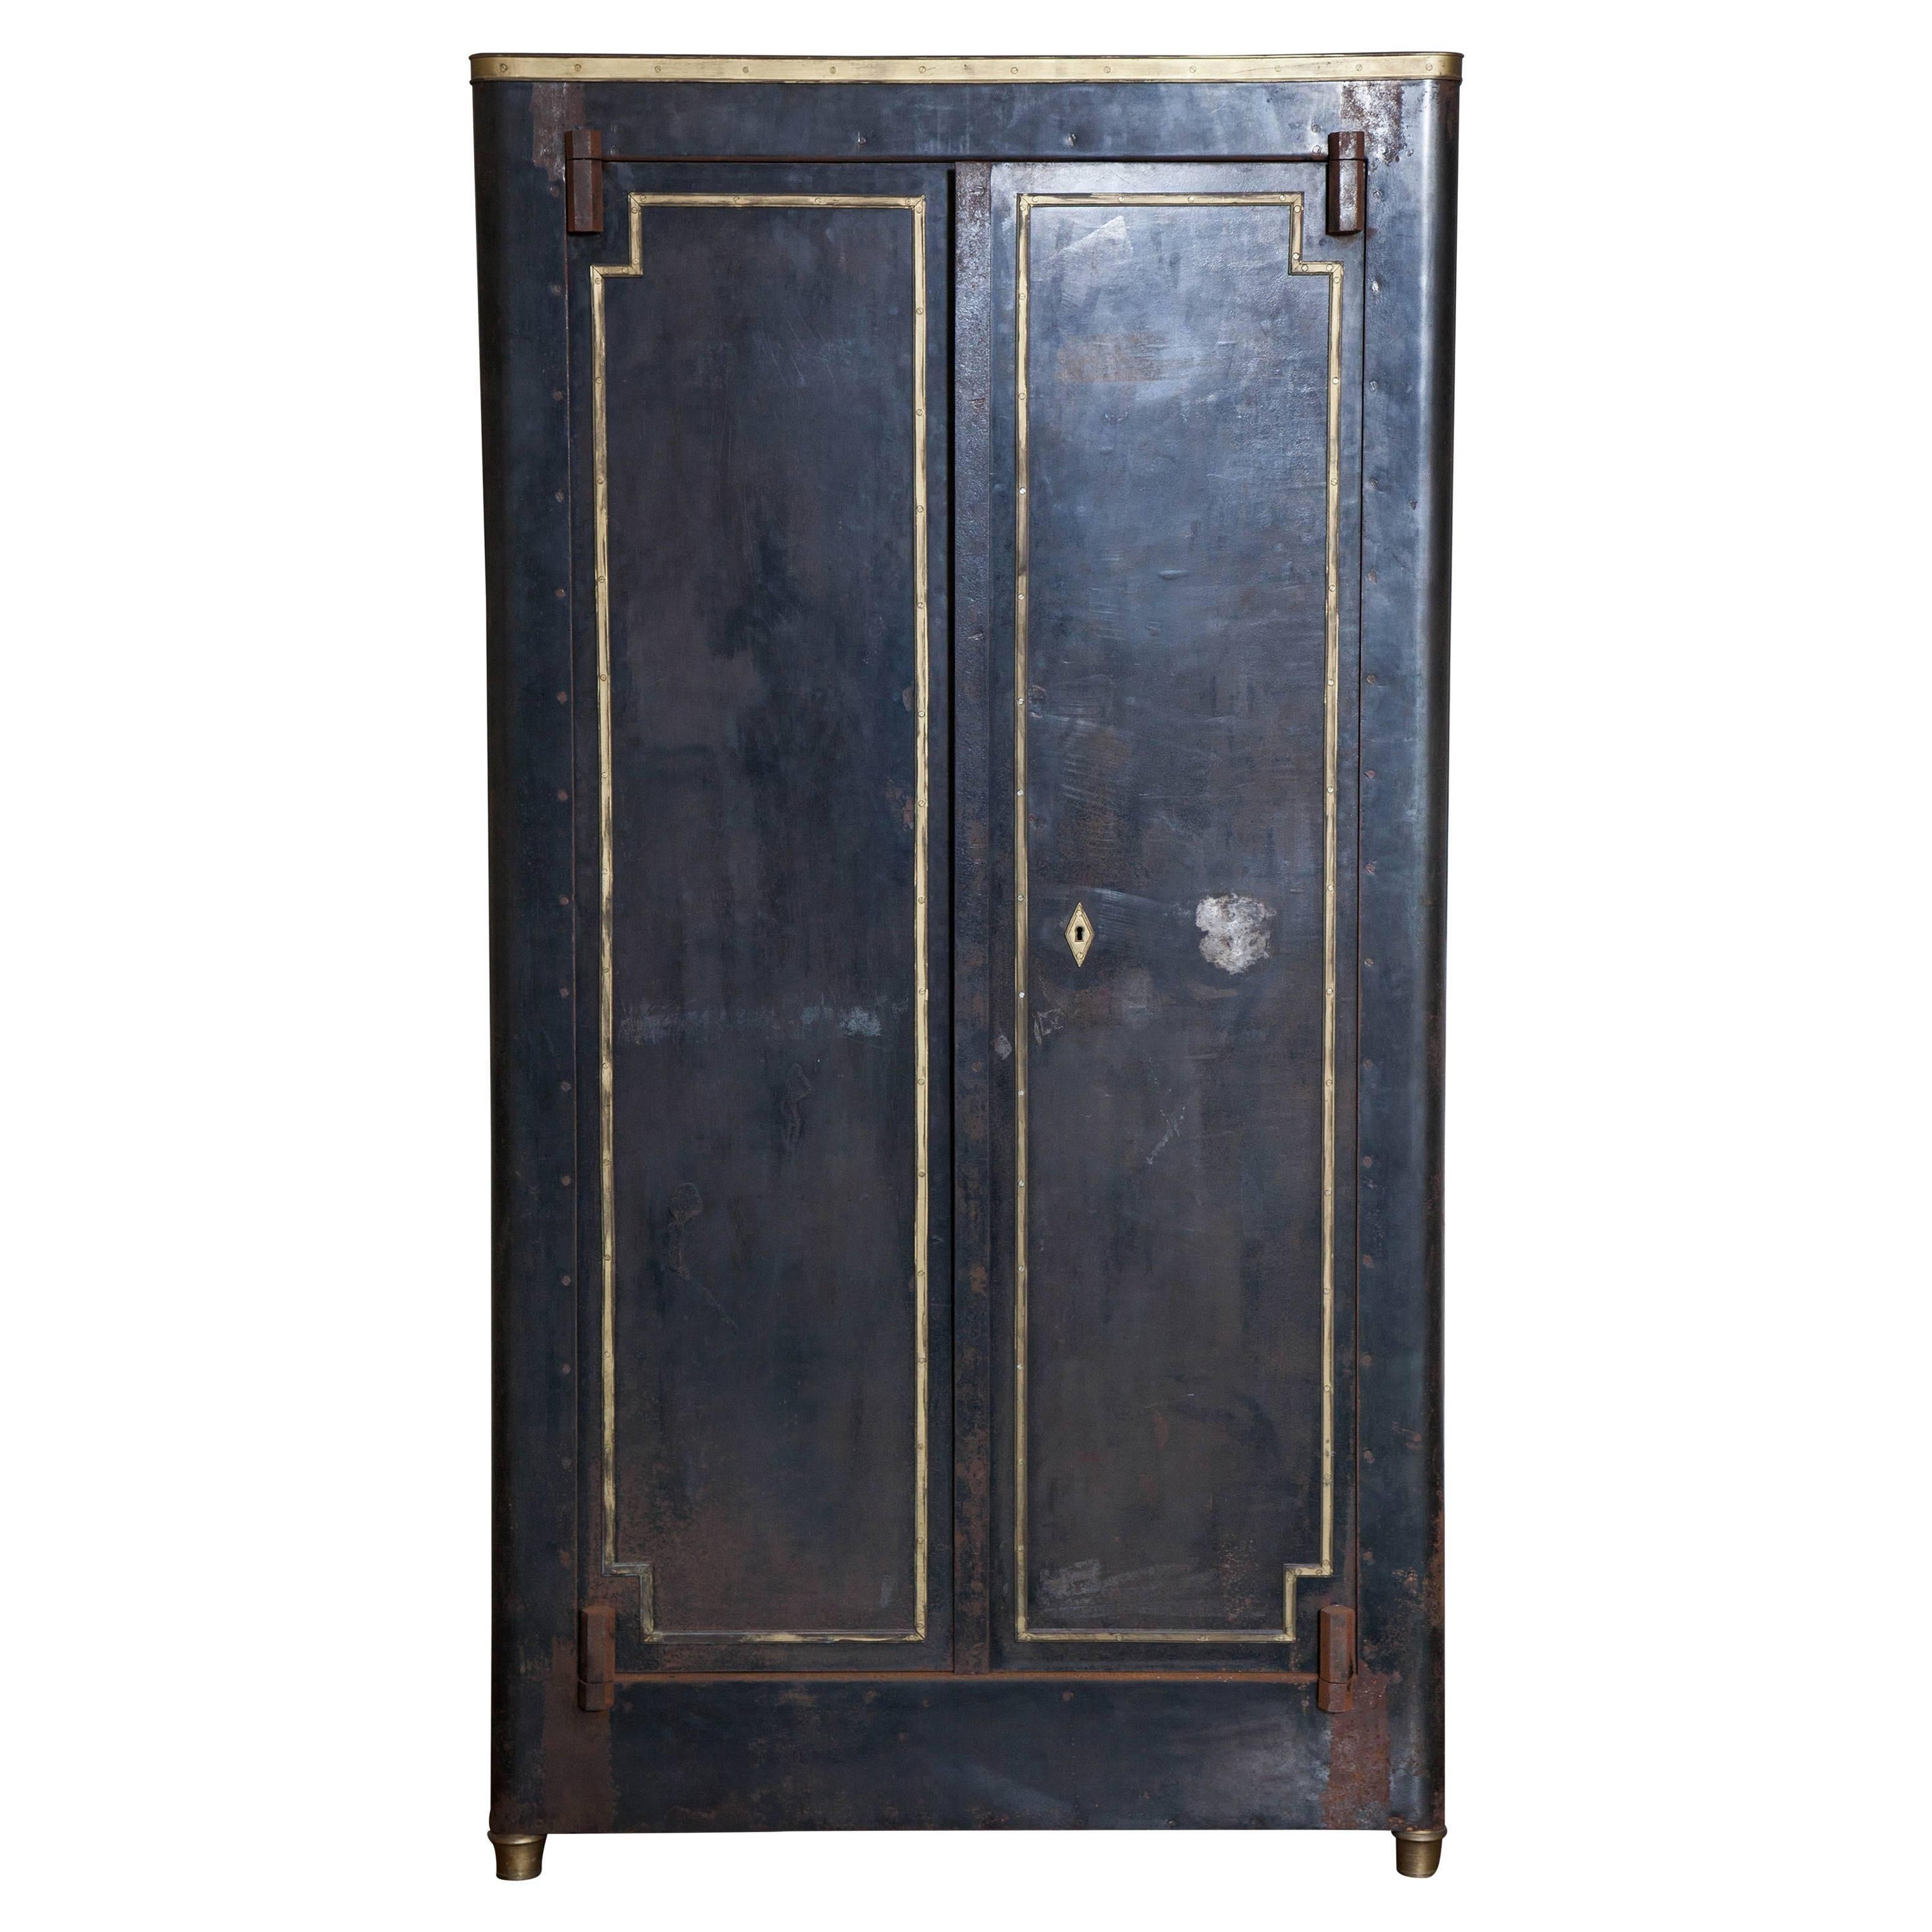 20th Century, French, Blackened Metal Cabinet with Bronze Accents